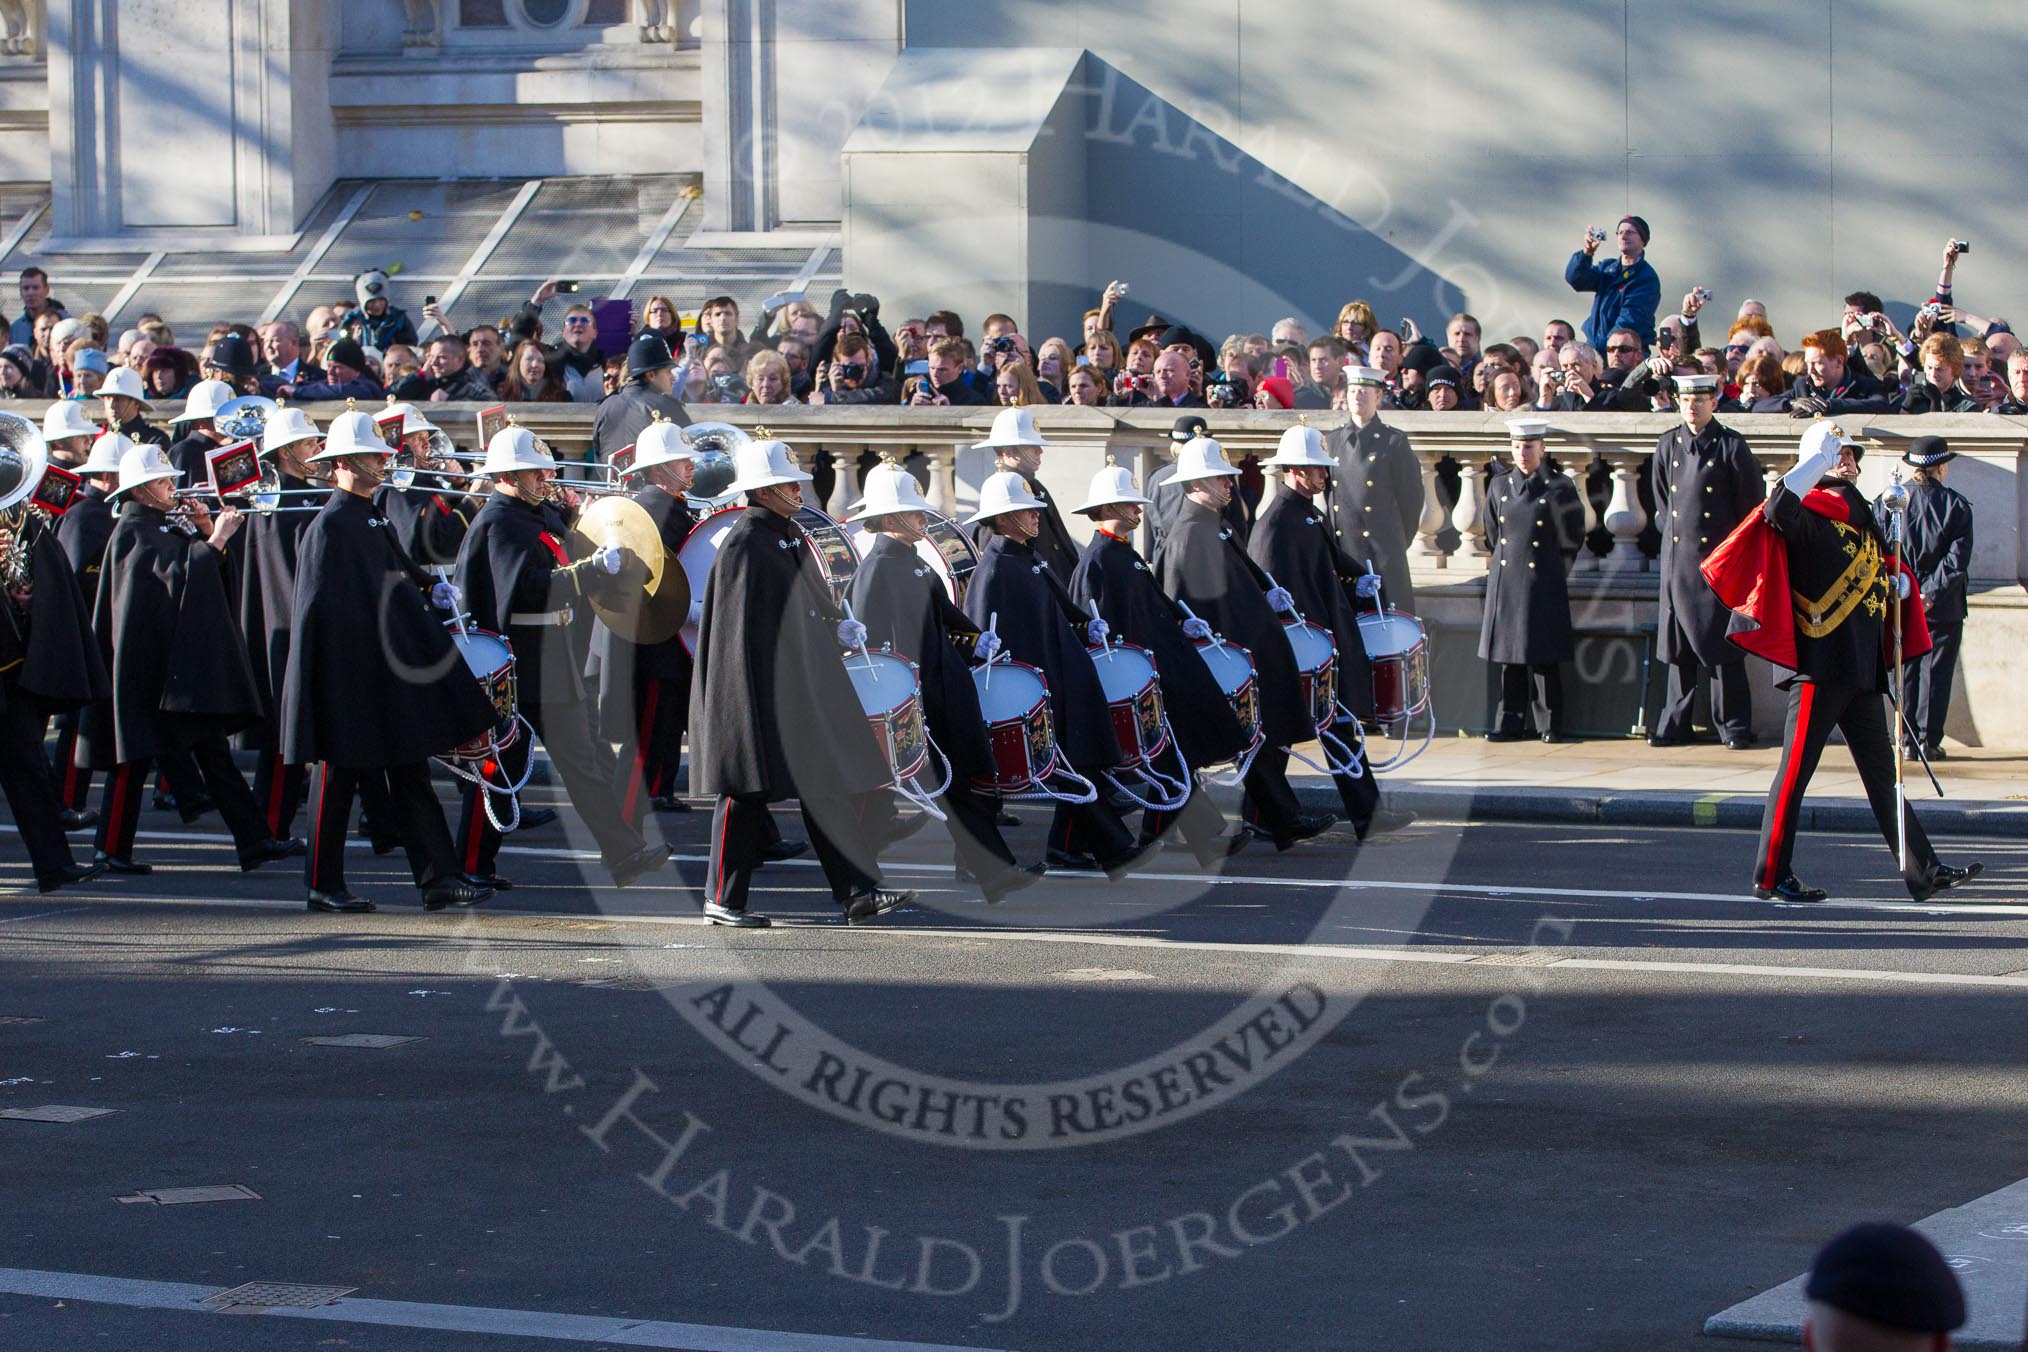 The Band of the Royal Marines arrives at the Cenotaph, the Drum Major saluting.